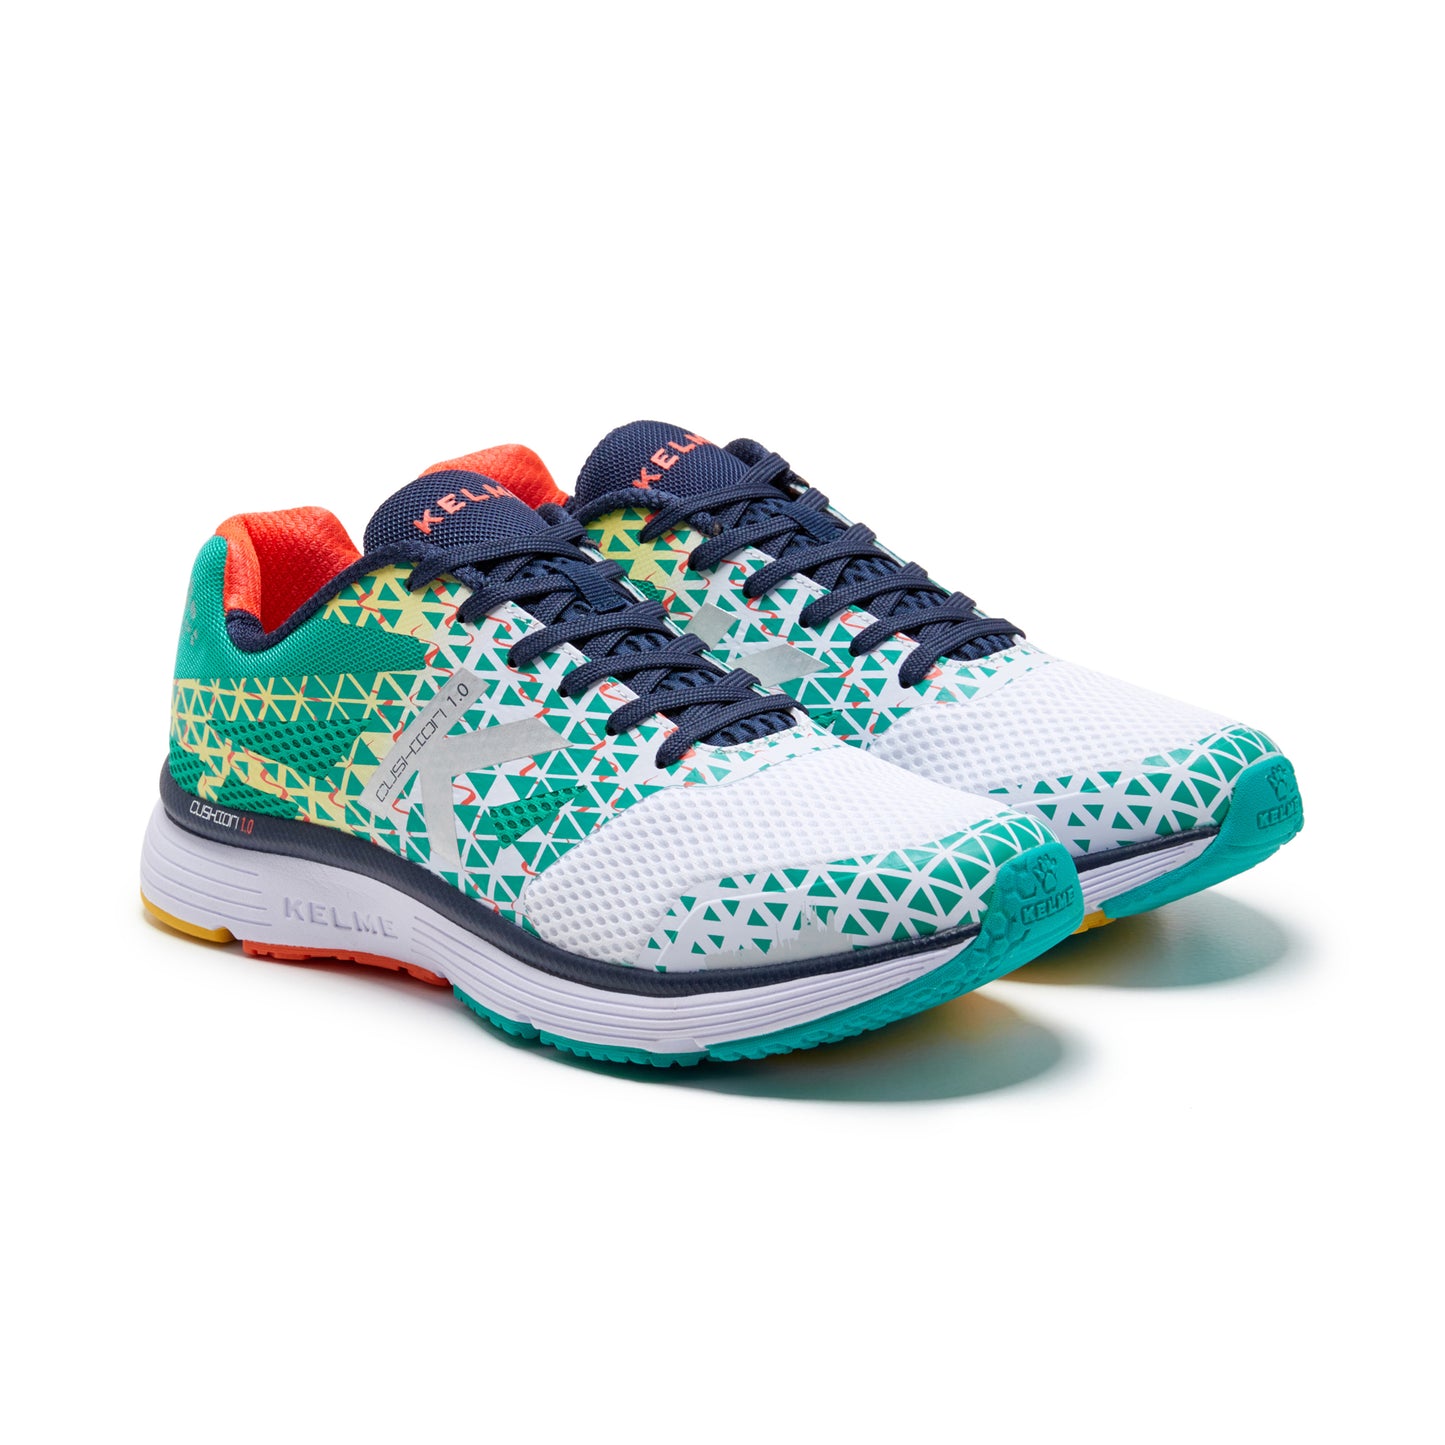 Barcelona Running Shoes- White/Turquoise